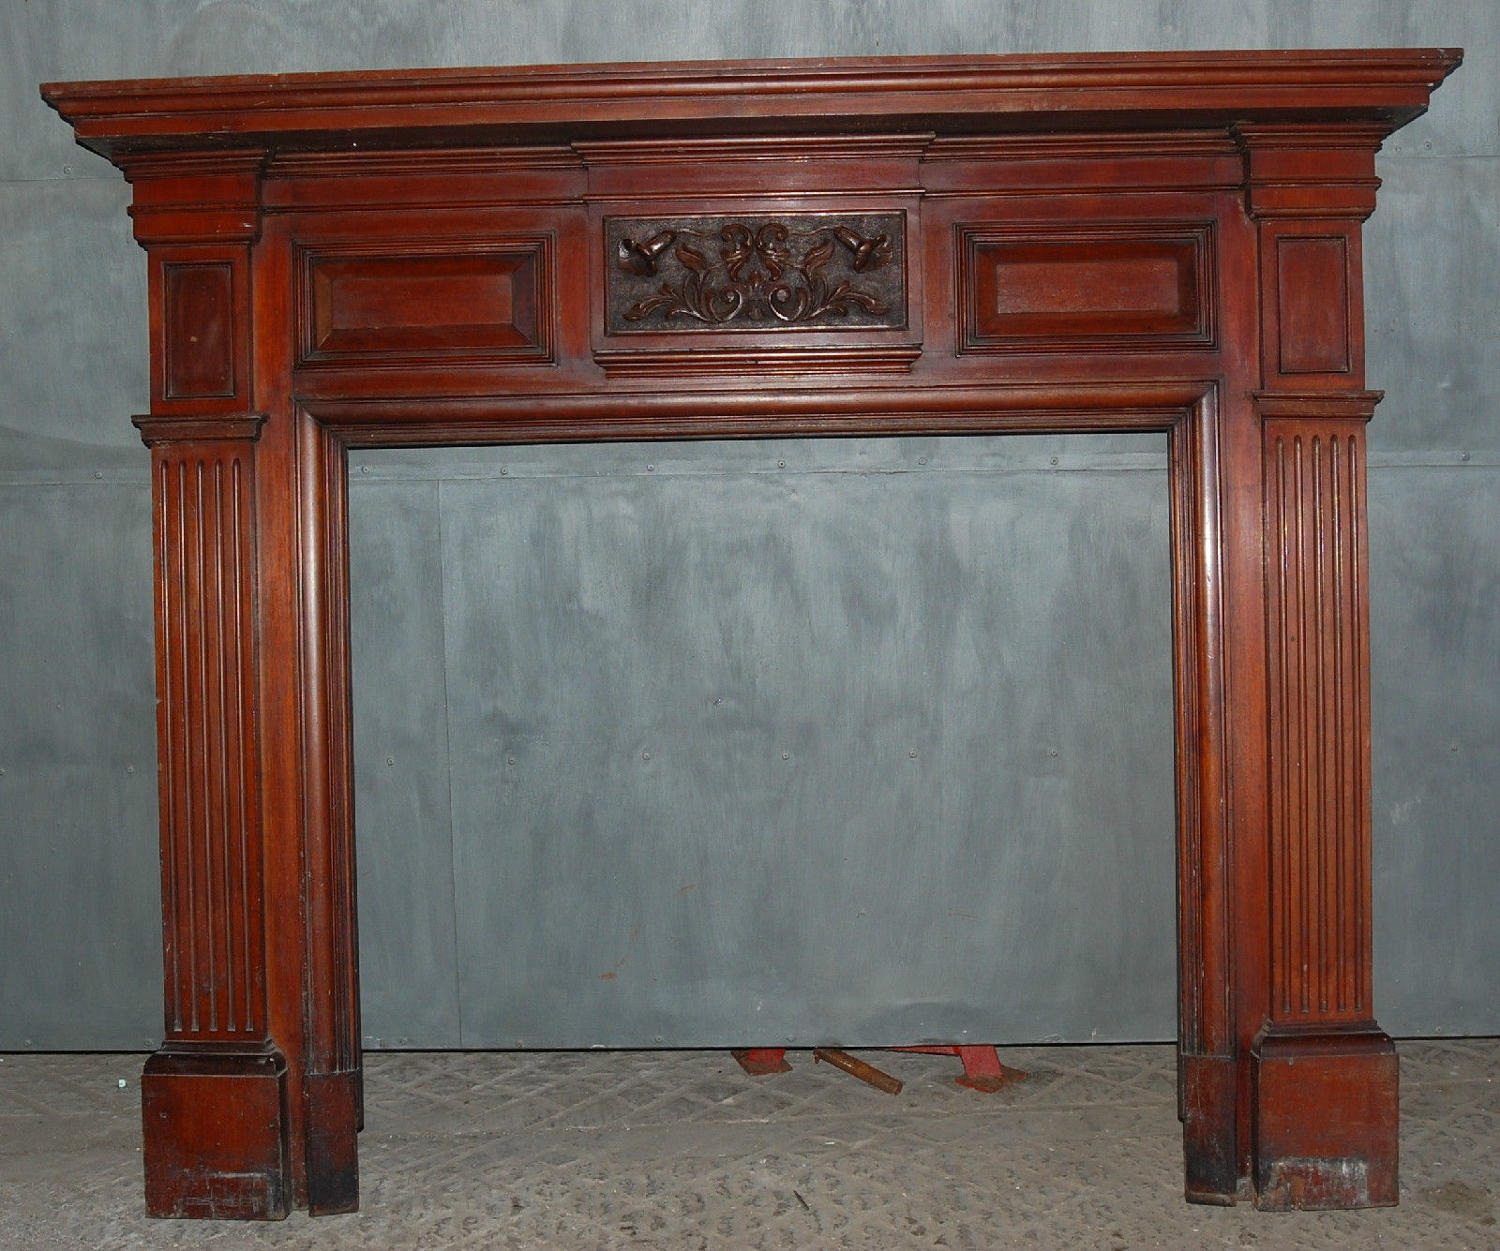 FS0014 A Large Edwardian Formal Carved Mahogany Fire Surround